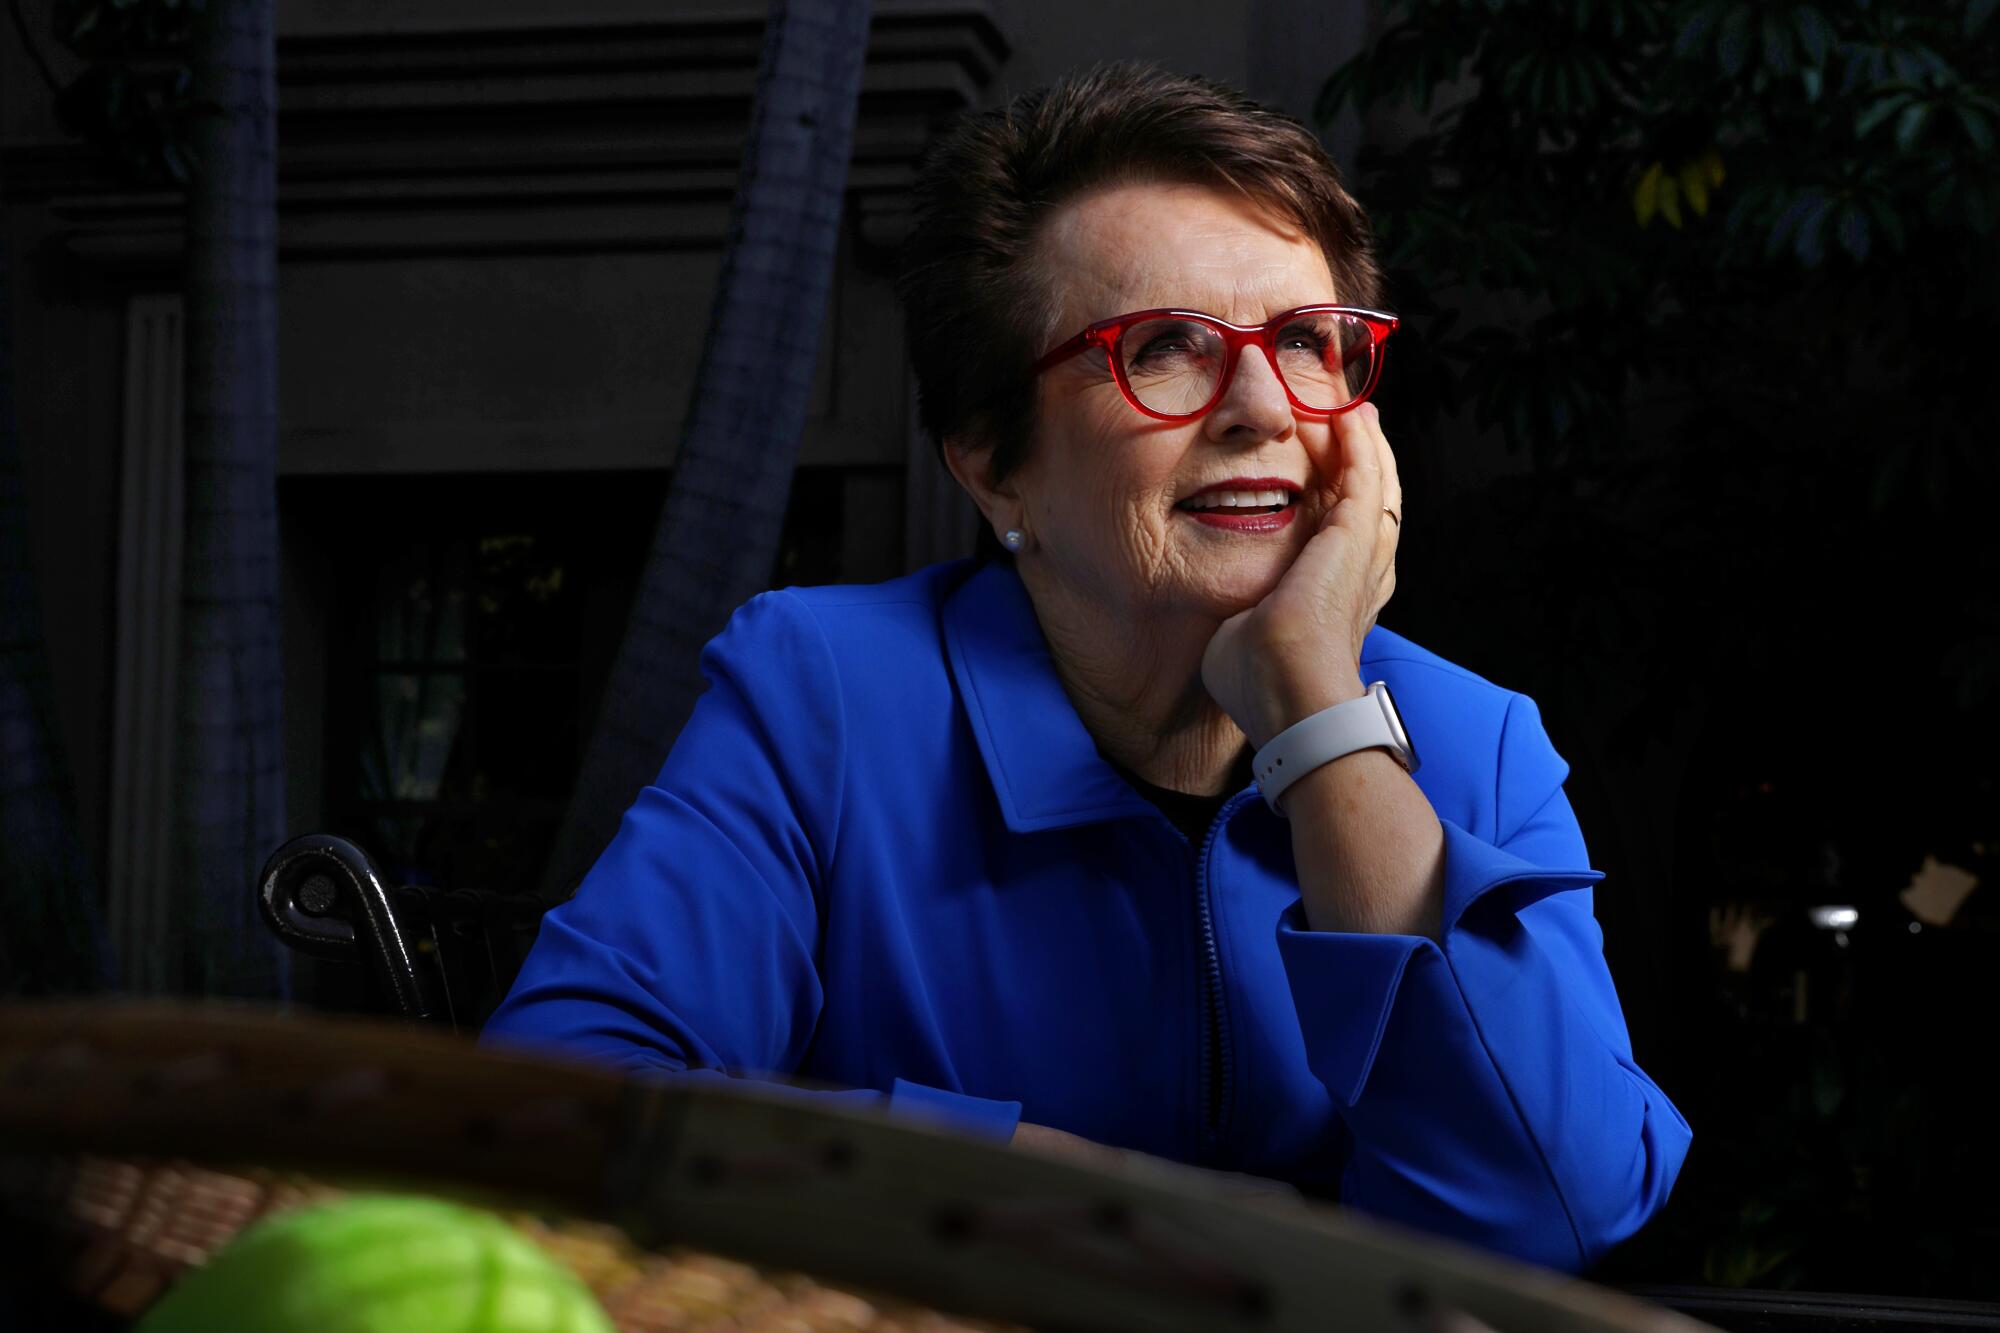 Tennis legend Billie Jean King, photographed at the Langham Huntington hotel in Pasadena, says she wants “women’s sports to keep moving forward because it’s really a microcosm of society."